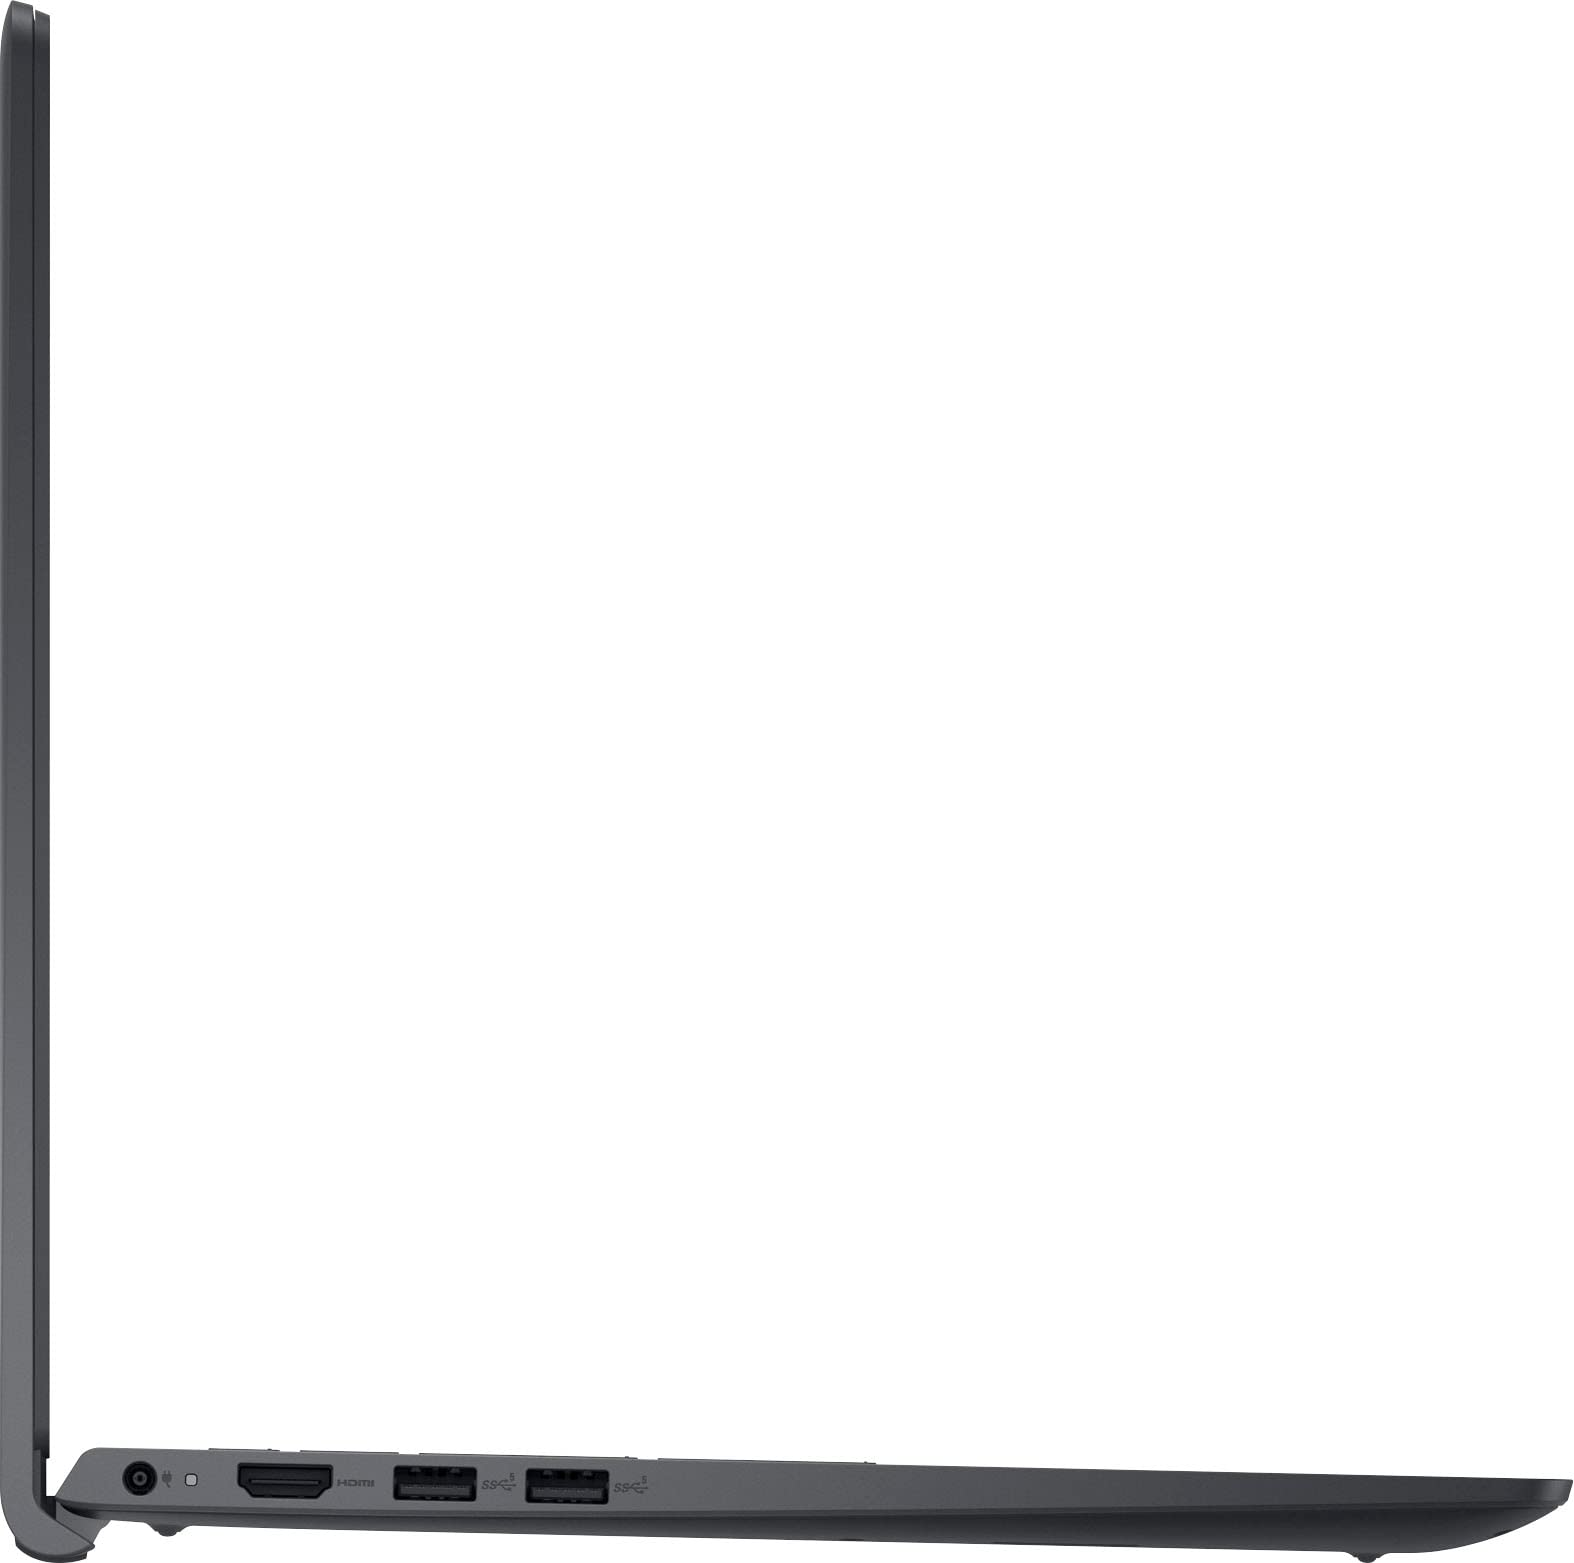 2022 Newest Dell Inspiron 15.6" FHD Touchscreen Laptop, Intel 10th Generation Core i5-1035G1(Up to 3.60GHz, Beat i7-8550U), 16GB Memory, 512GB PCIe SSD, Intel UHD Graphics, WiFi, Webcam, HDMI, Win11 S